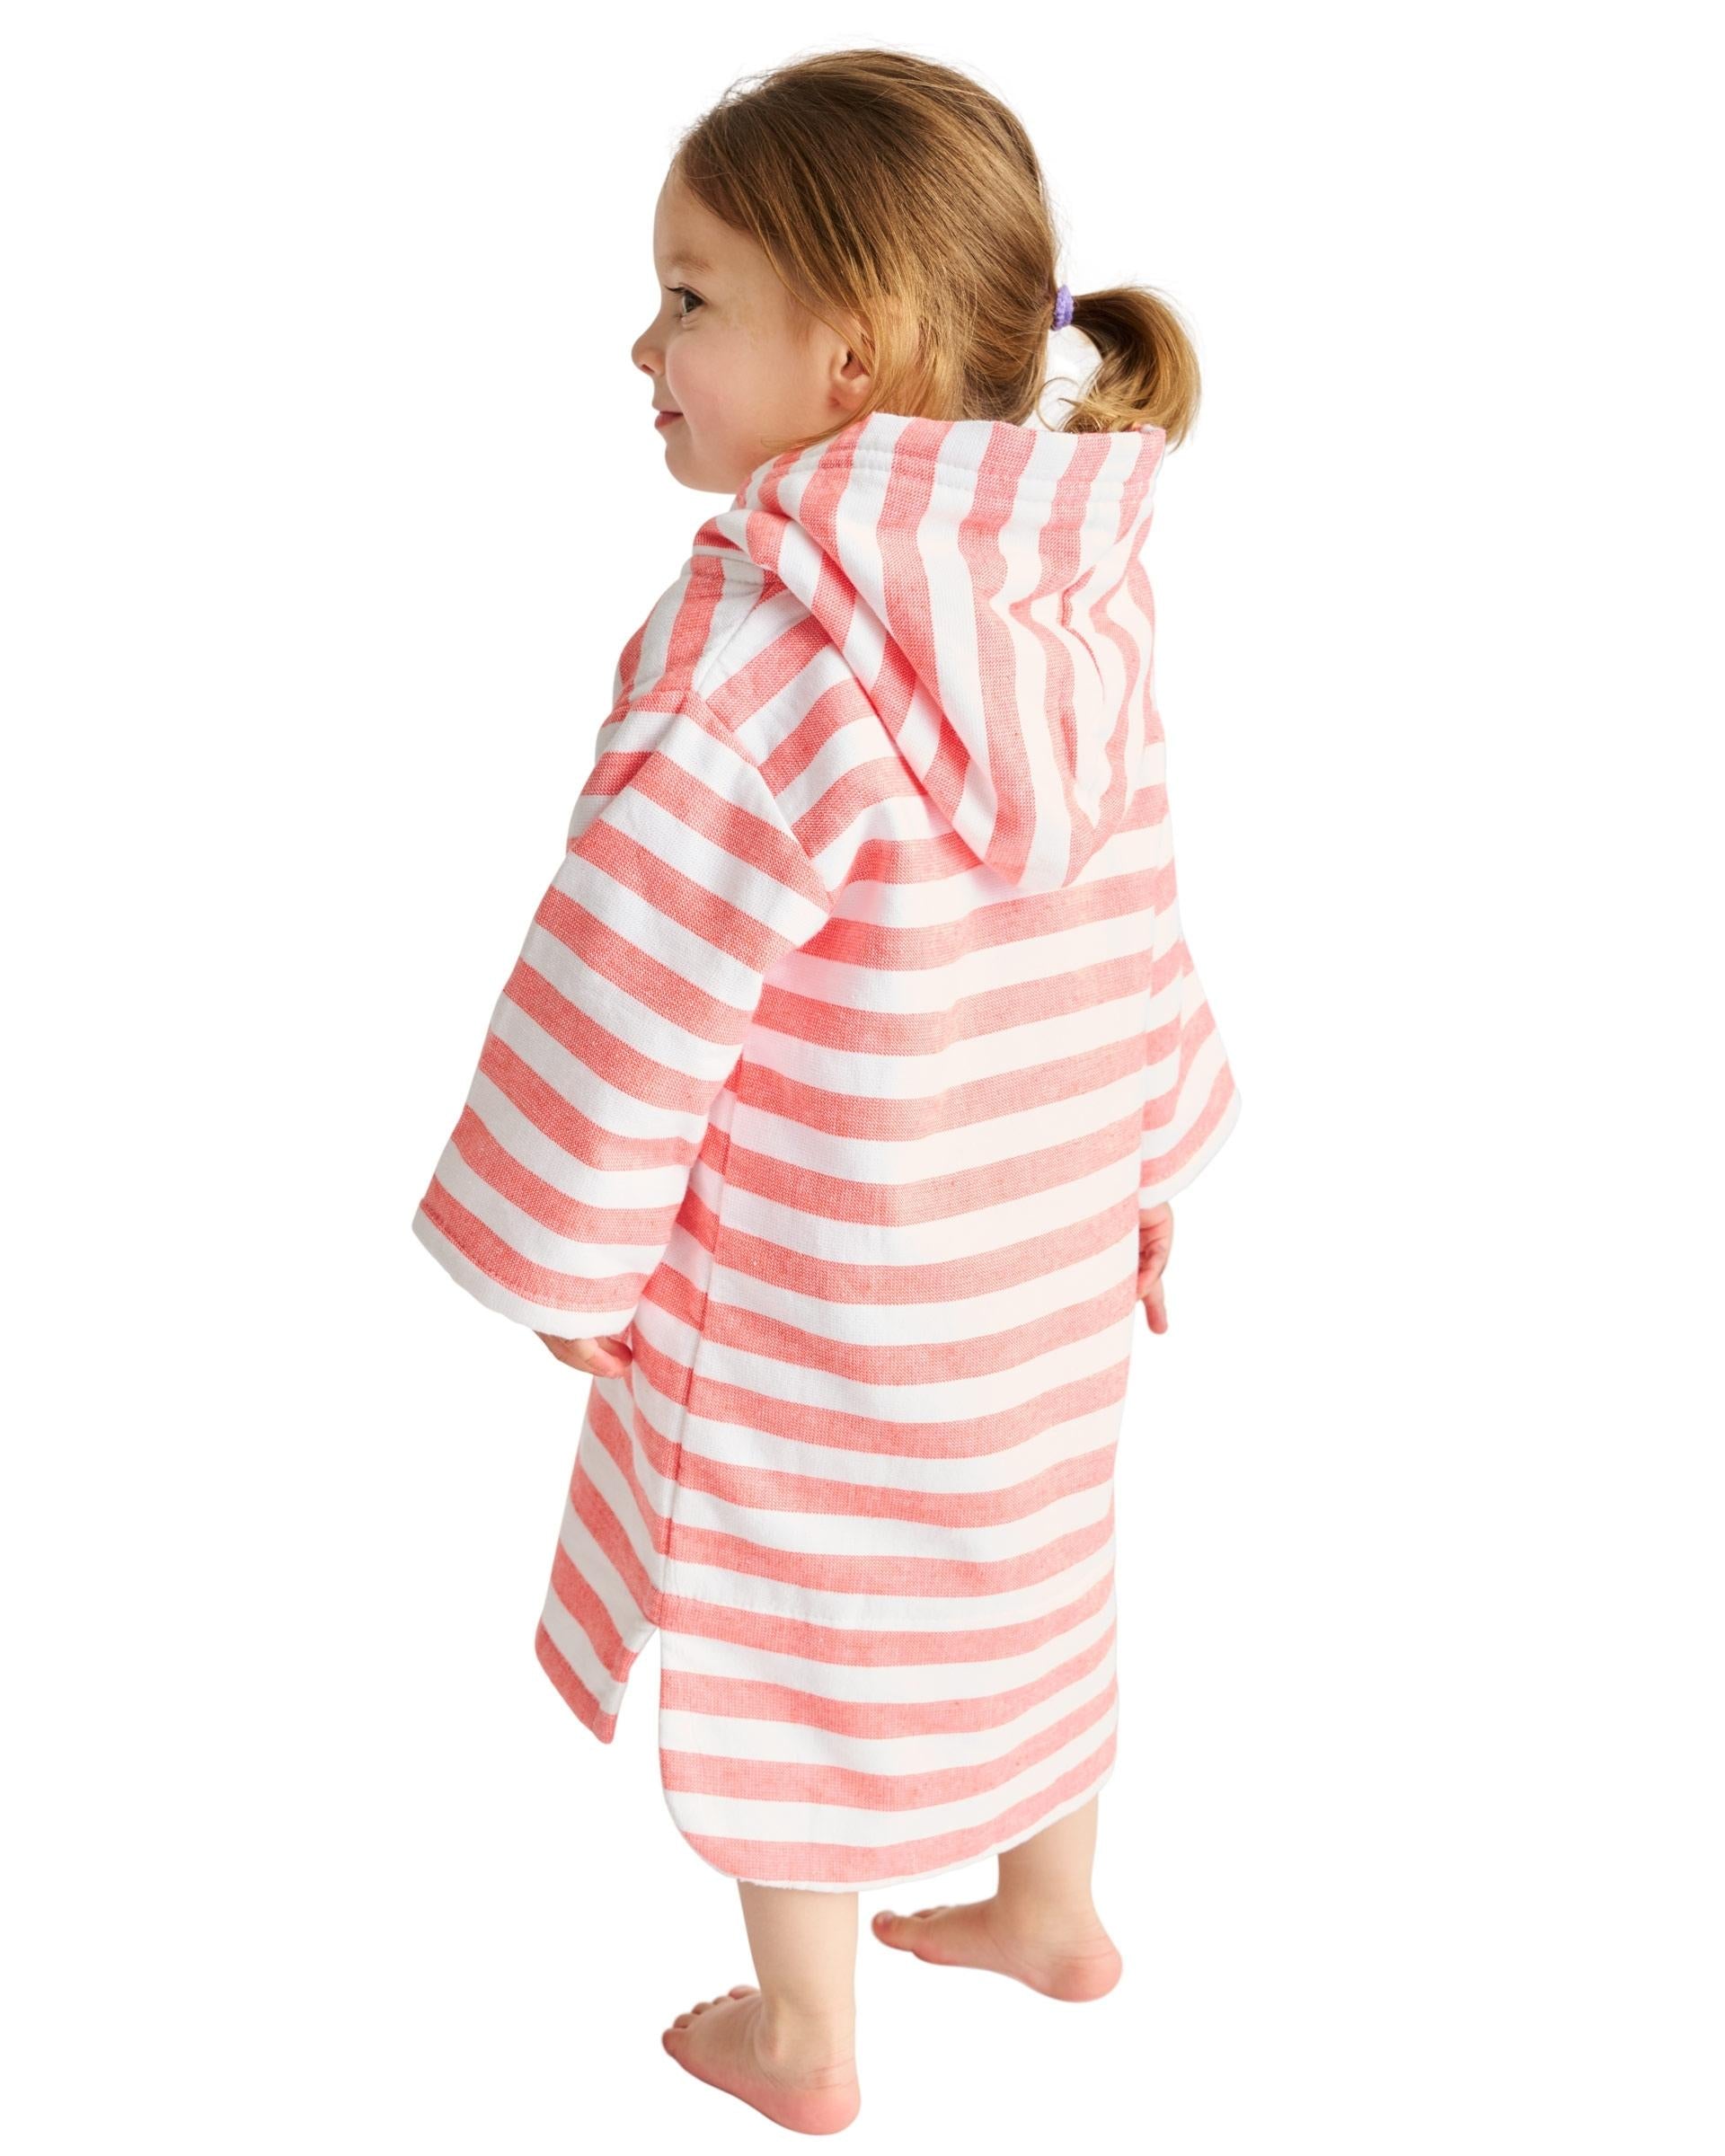 MENORCA Baby Terry Hooded Towel: Coral/White